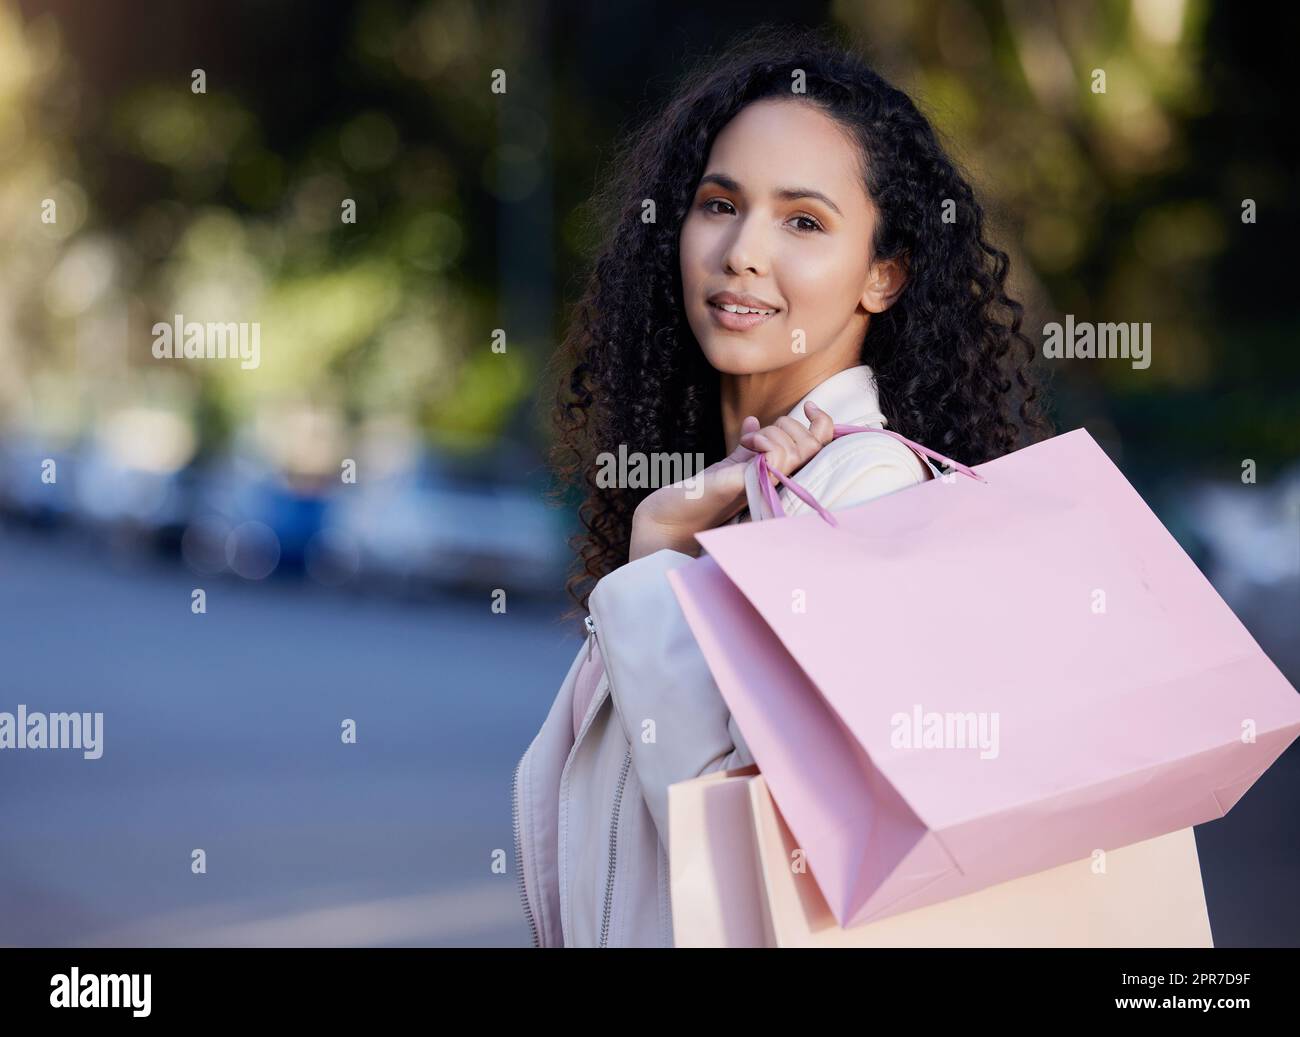 came to get some joy. a young woman out shopping in the city. Stock Photo